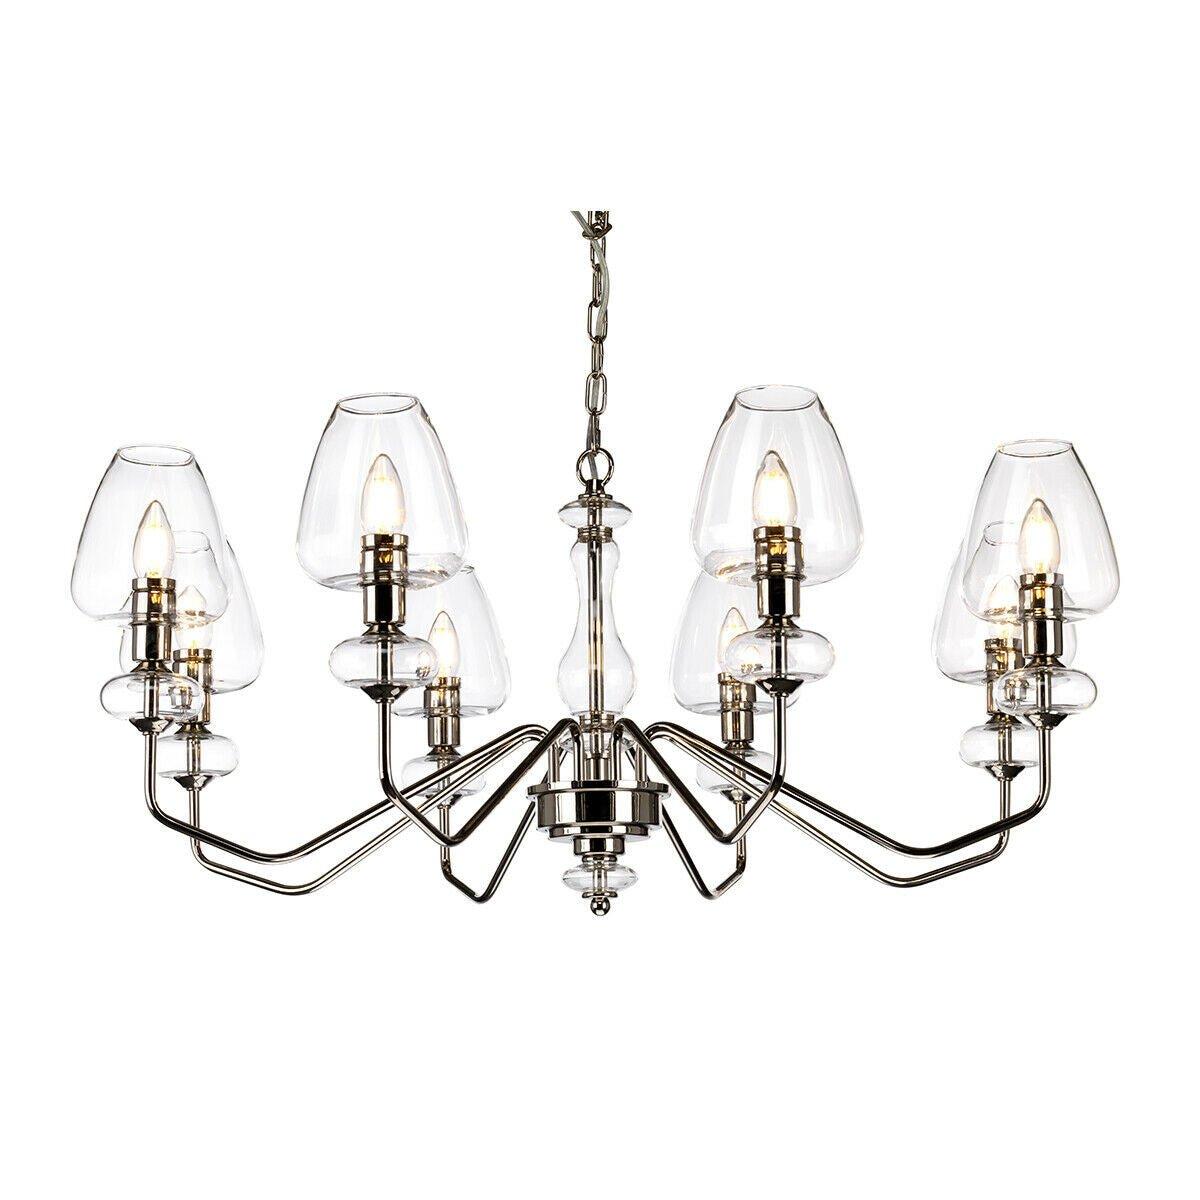 8 Bulb Chandelier Highly Polished Nickel Finish Clear Glass Shades LED E14 40W